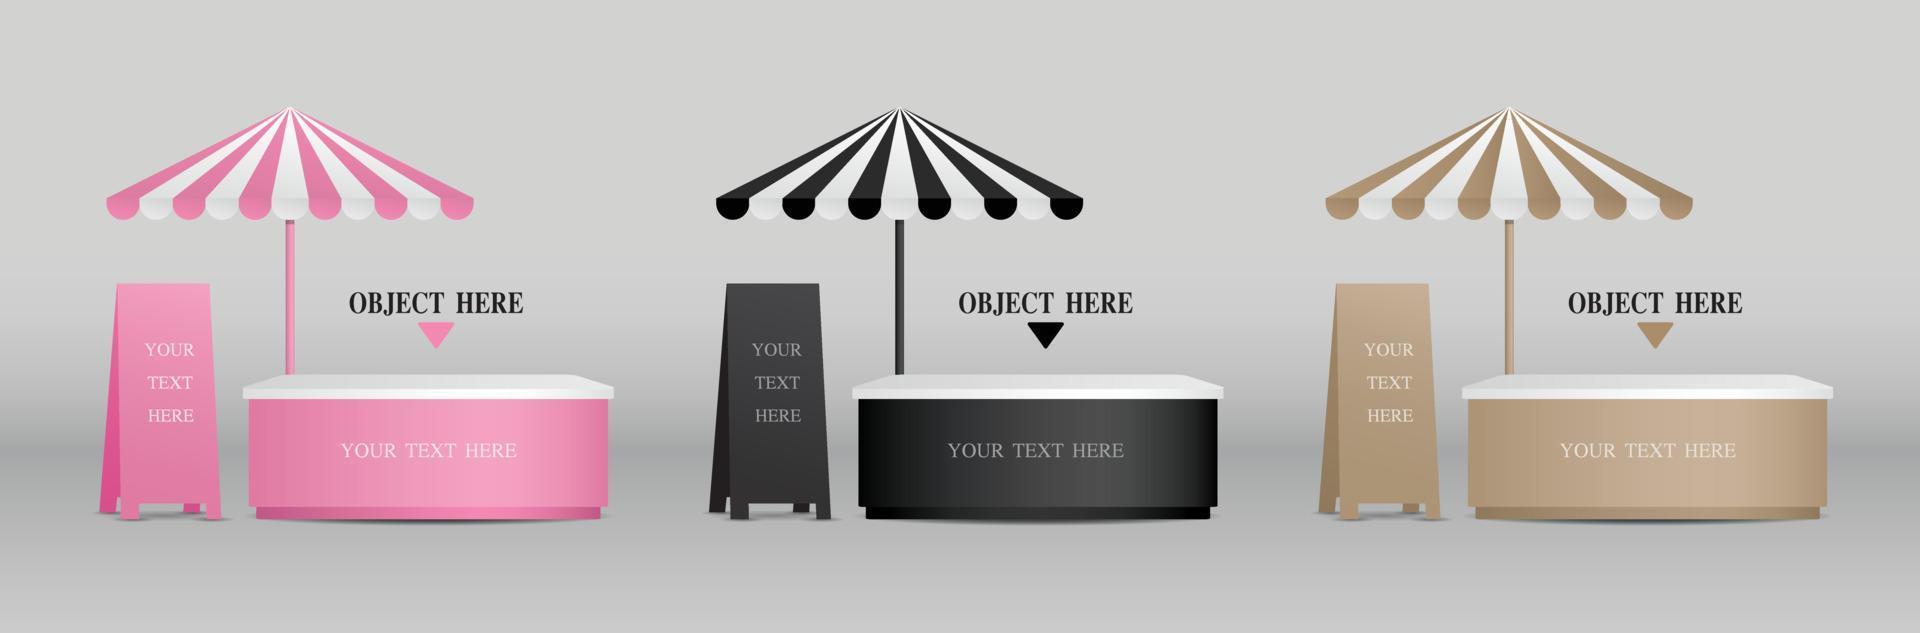 Cute mobile booth collection with parasol and signboard 3d illustration vector for putting your object